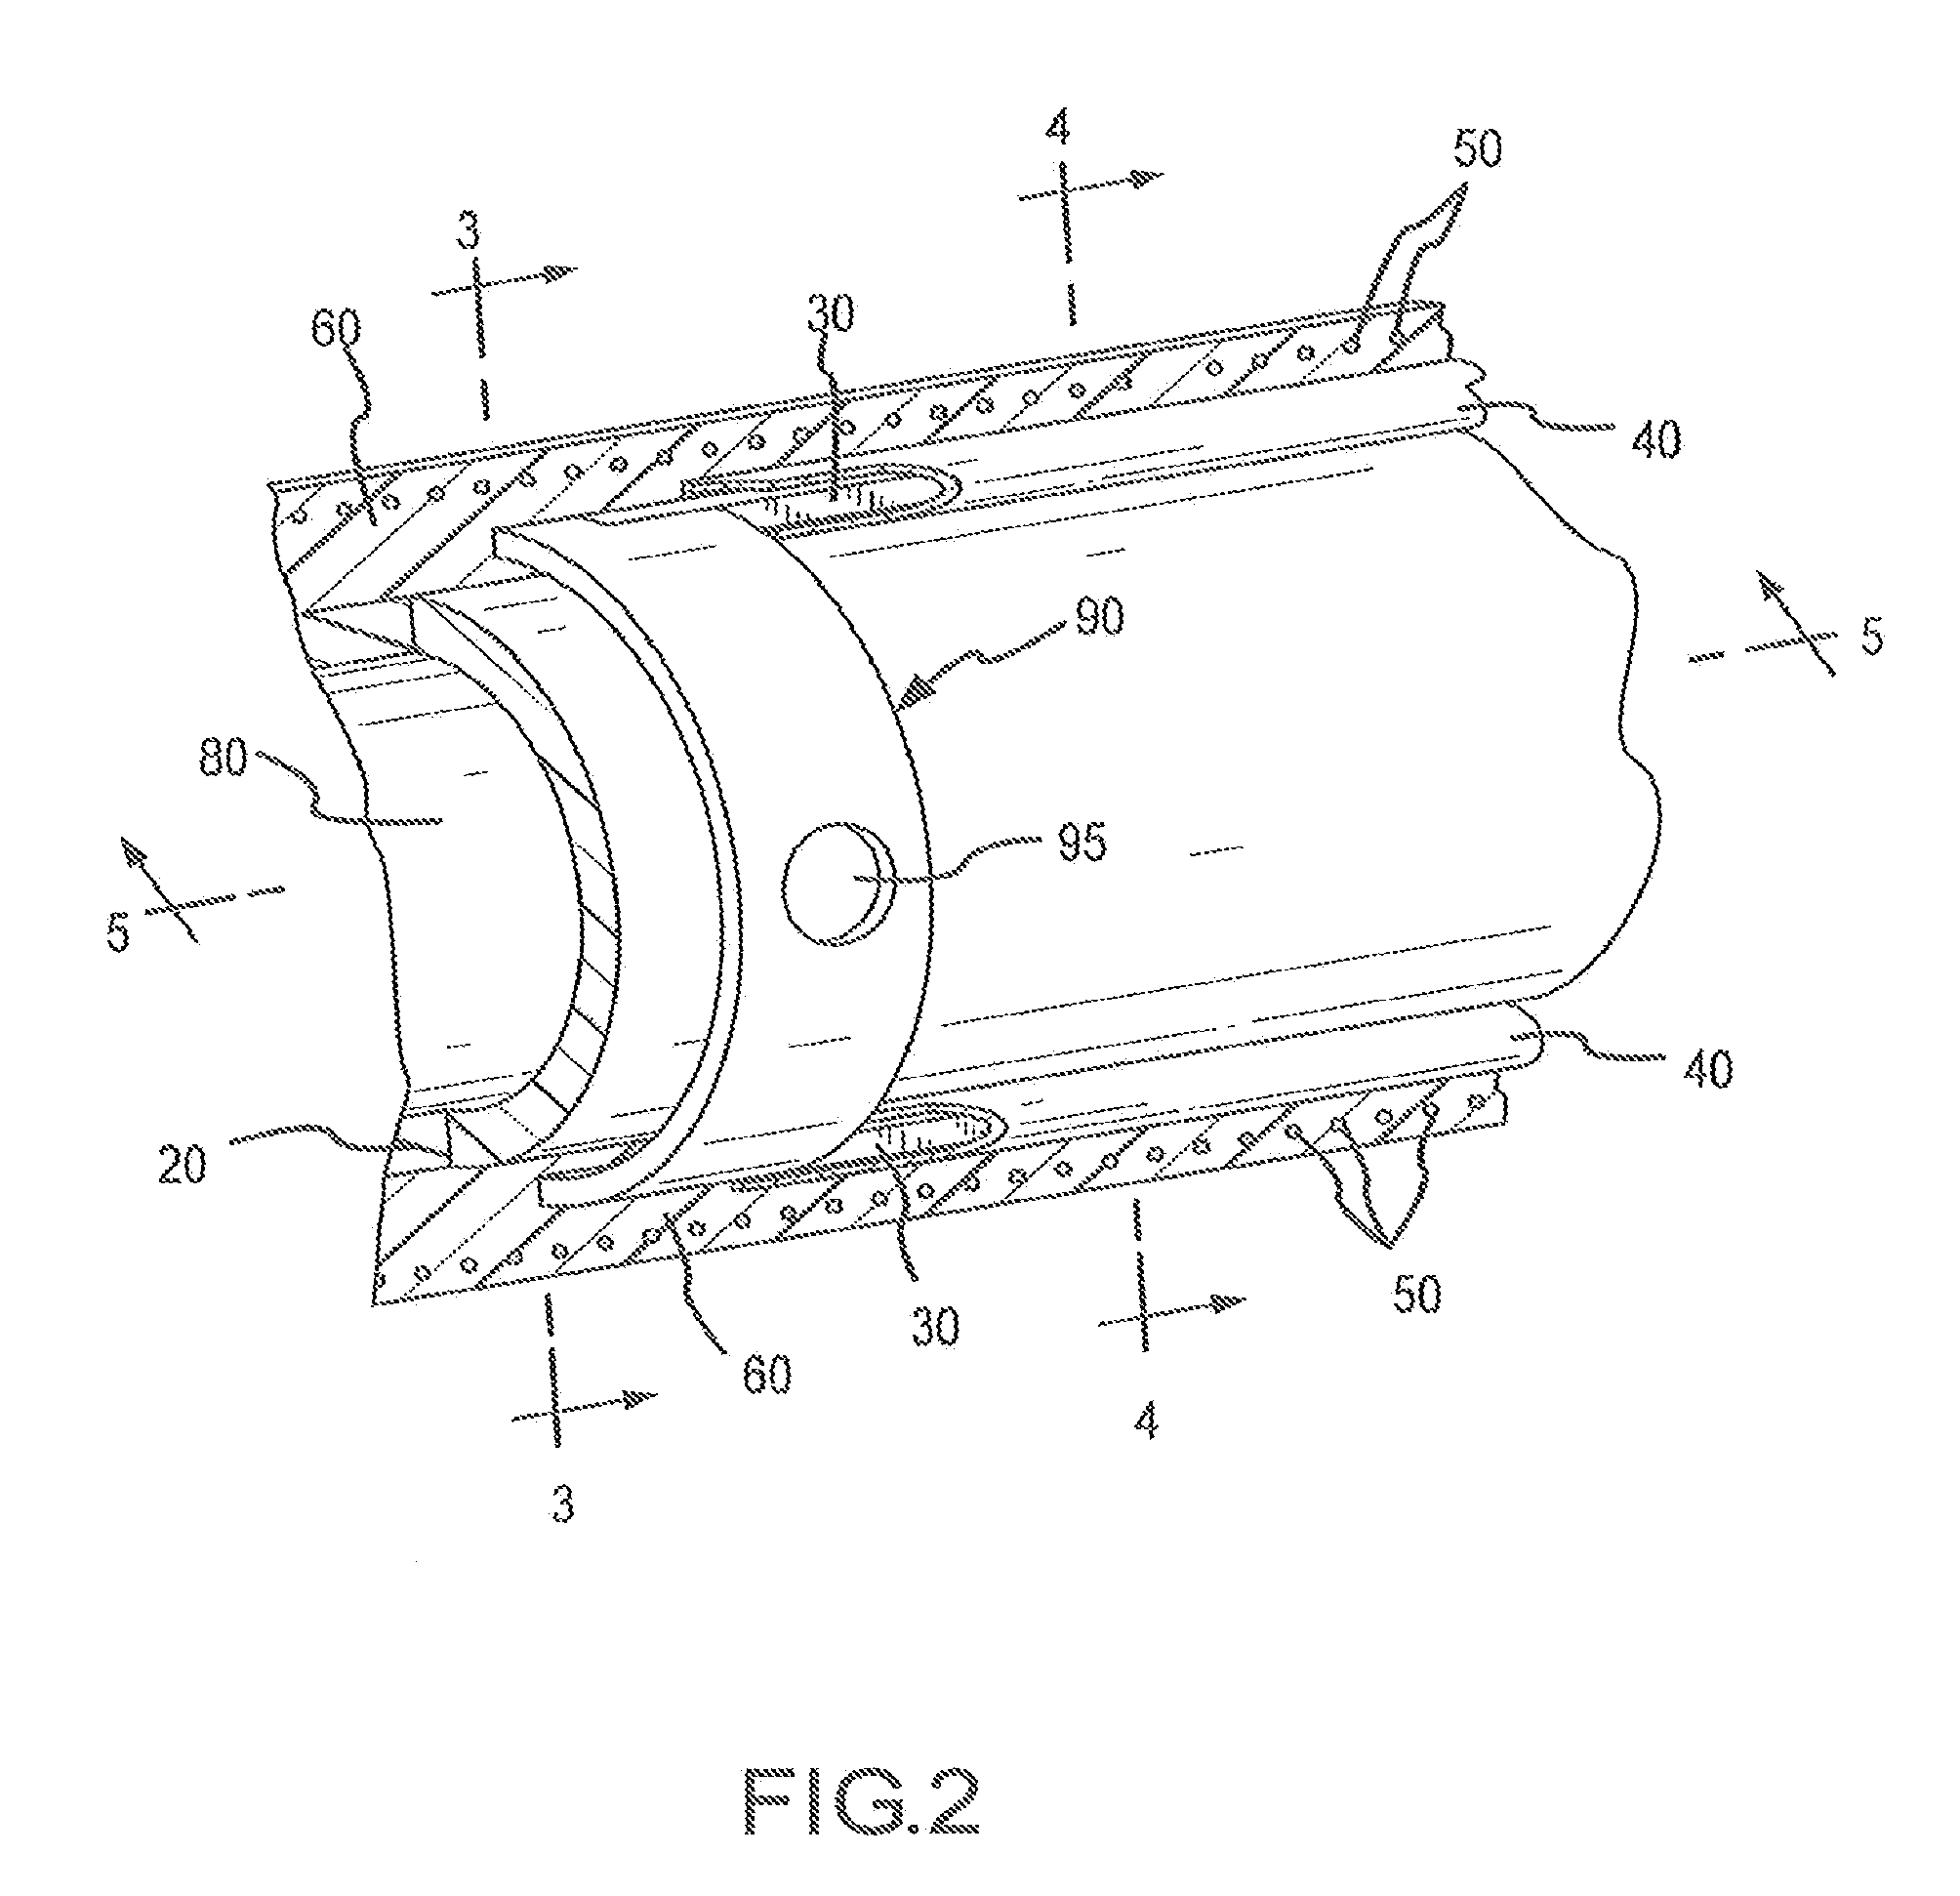 Steerable Catheter Using Flat Pull Wires and Having Torque Transfer Layer Made of Braided Flat Wires